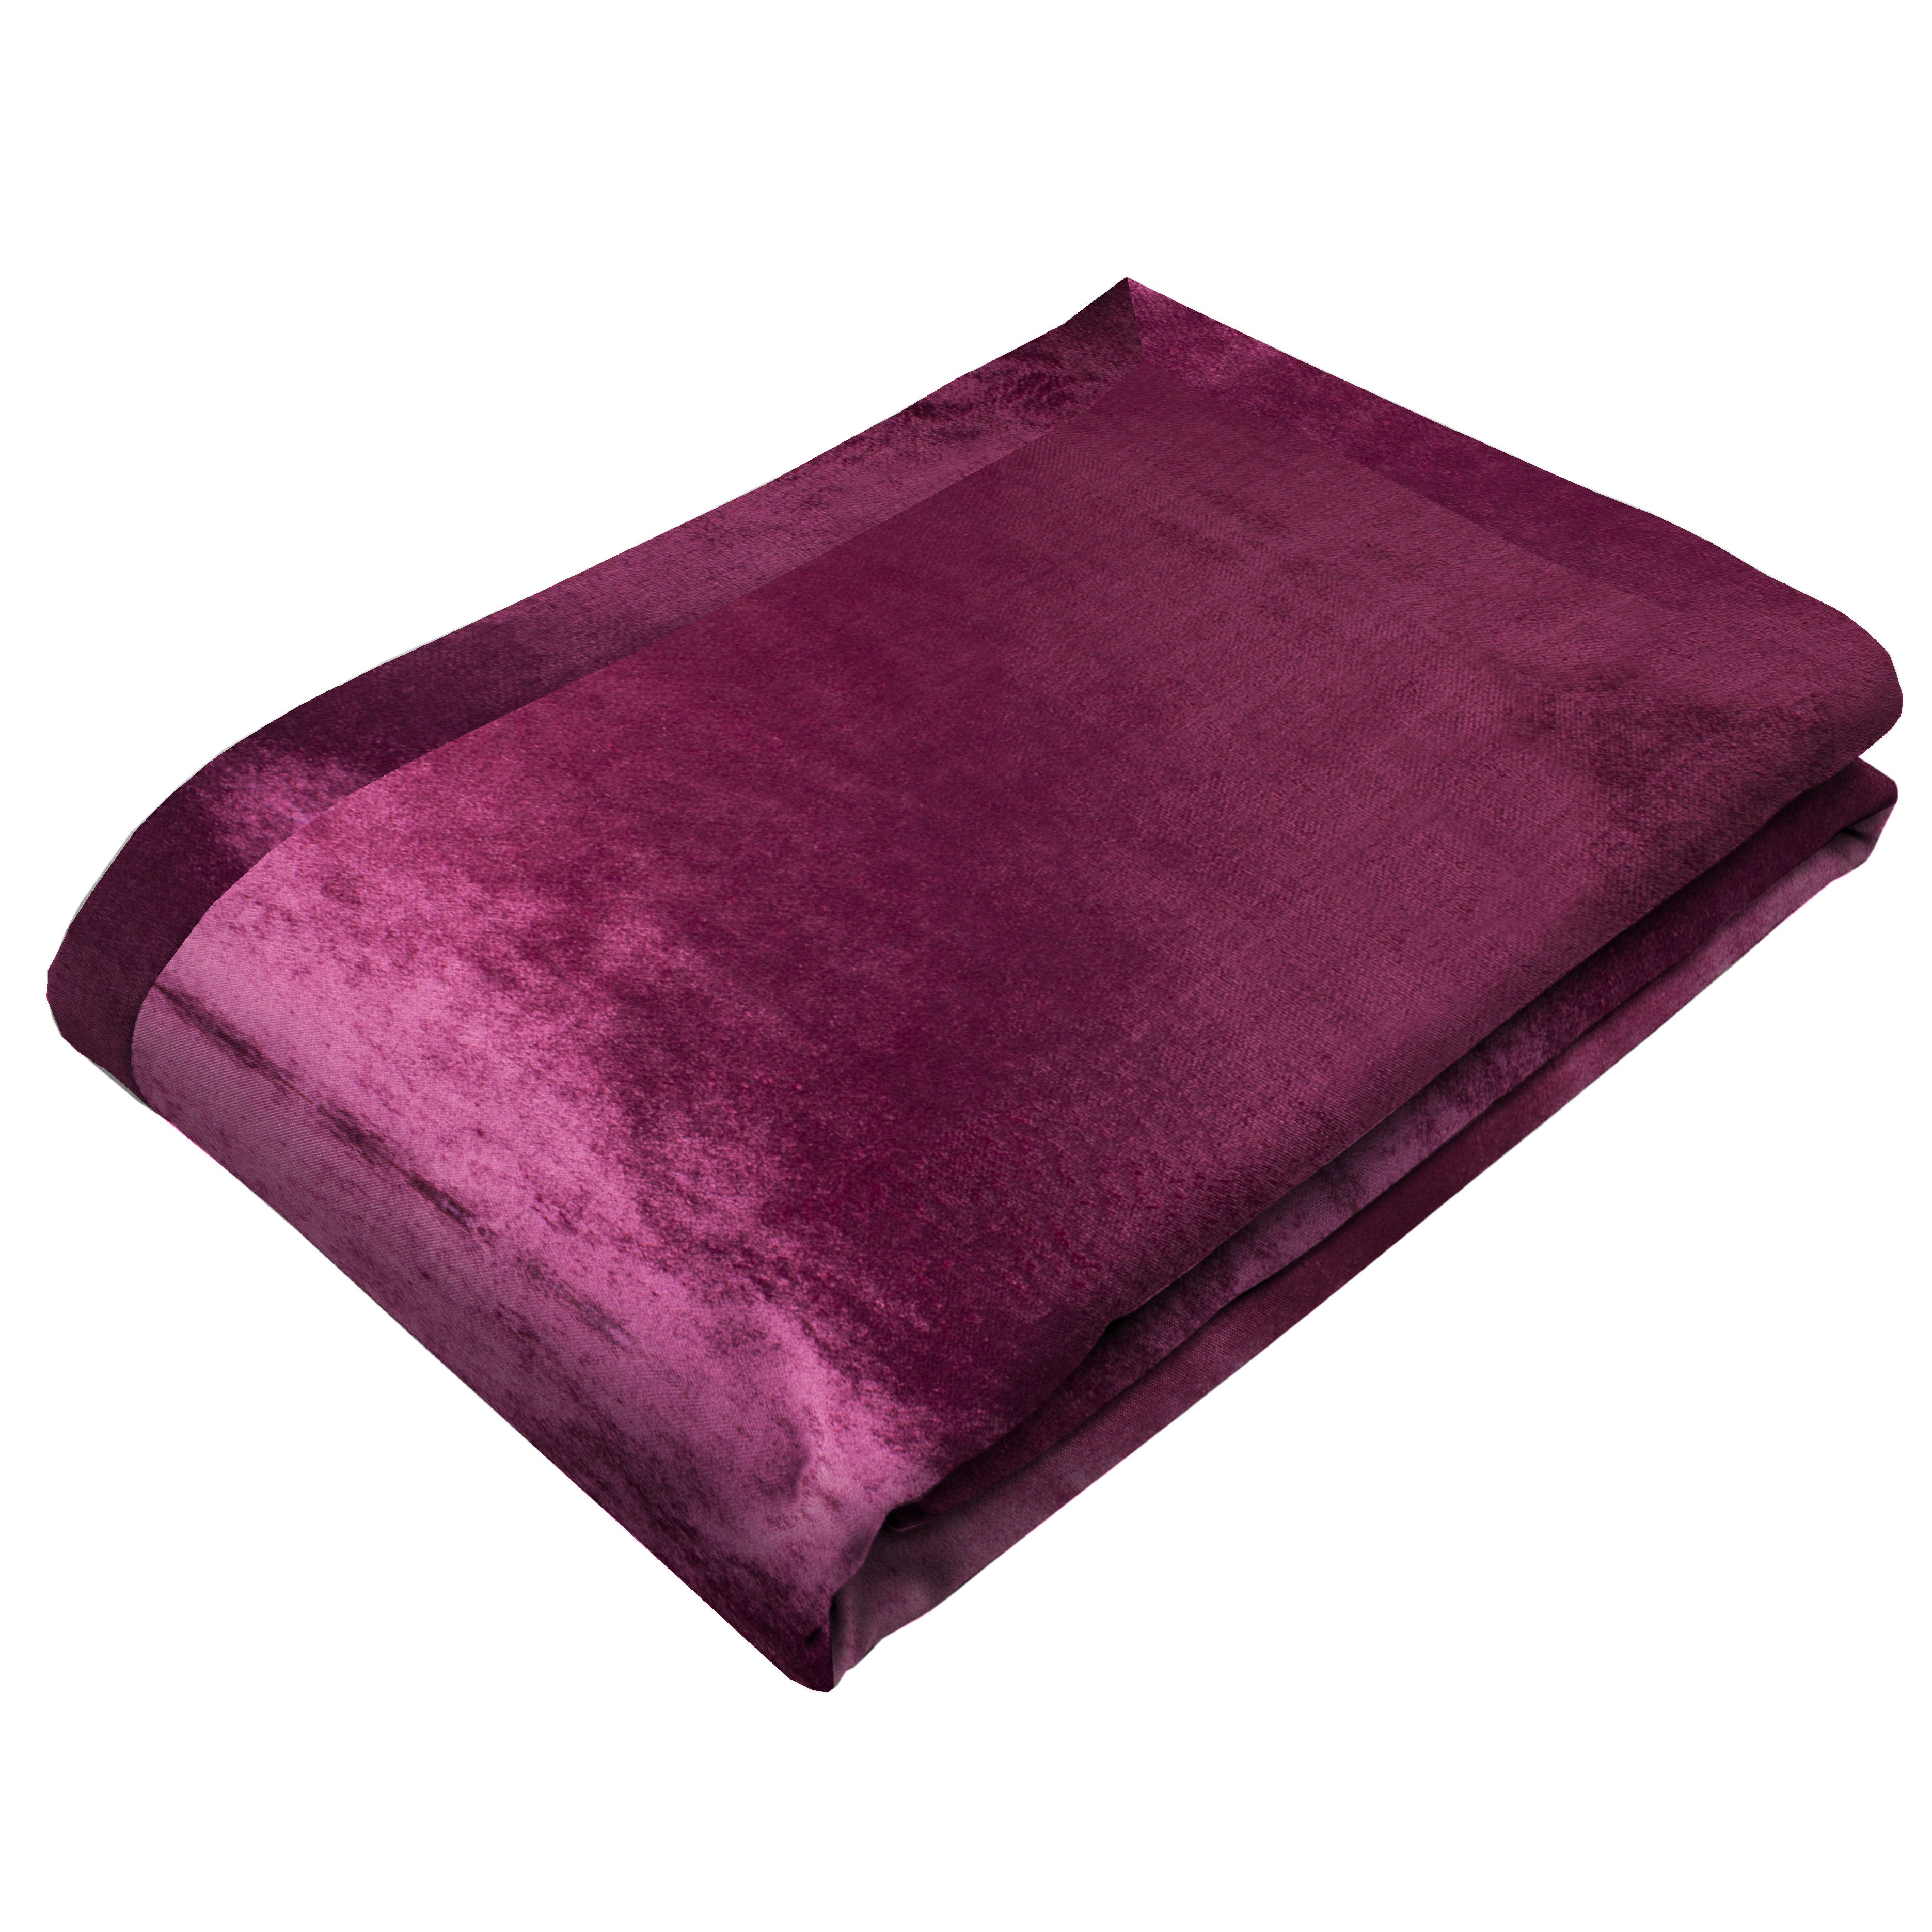 McAlister Textiles Fuchsia Pink Crushed Velvet Throws & Runners Throws and Runners 